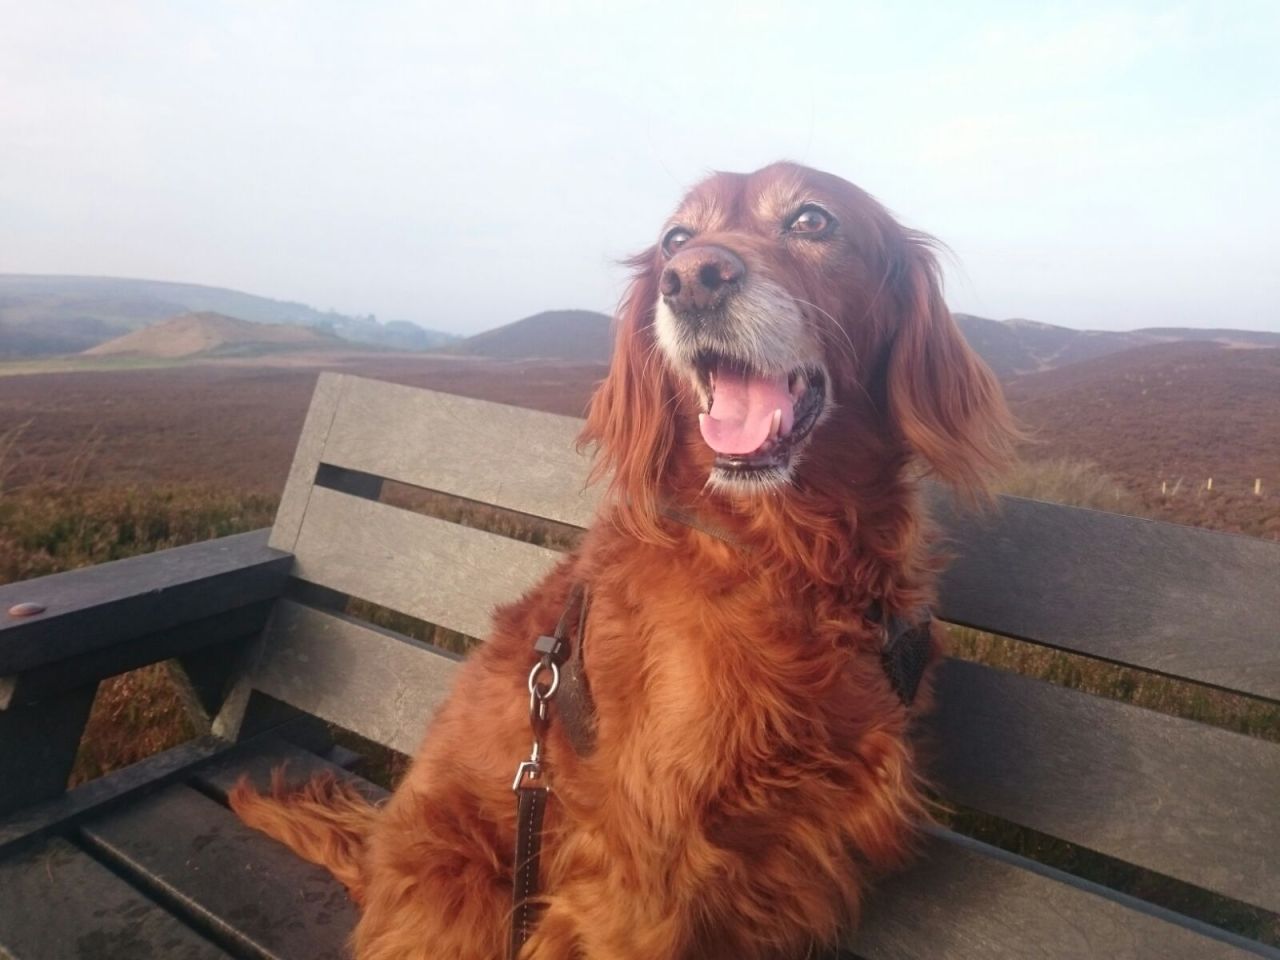 She might be an old dog, but she still loves scenic walks (Source: http://ift.tt/2j2dvwL)